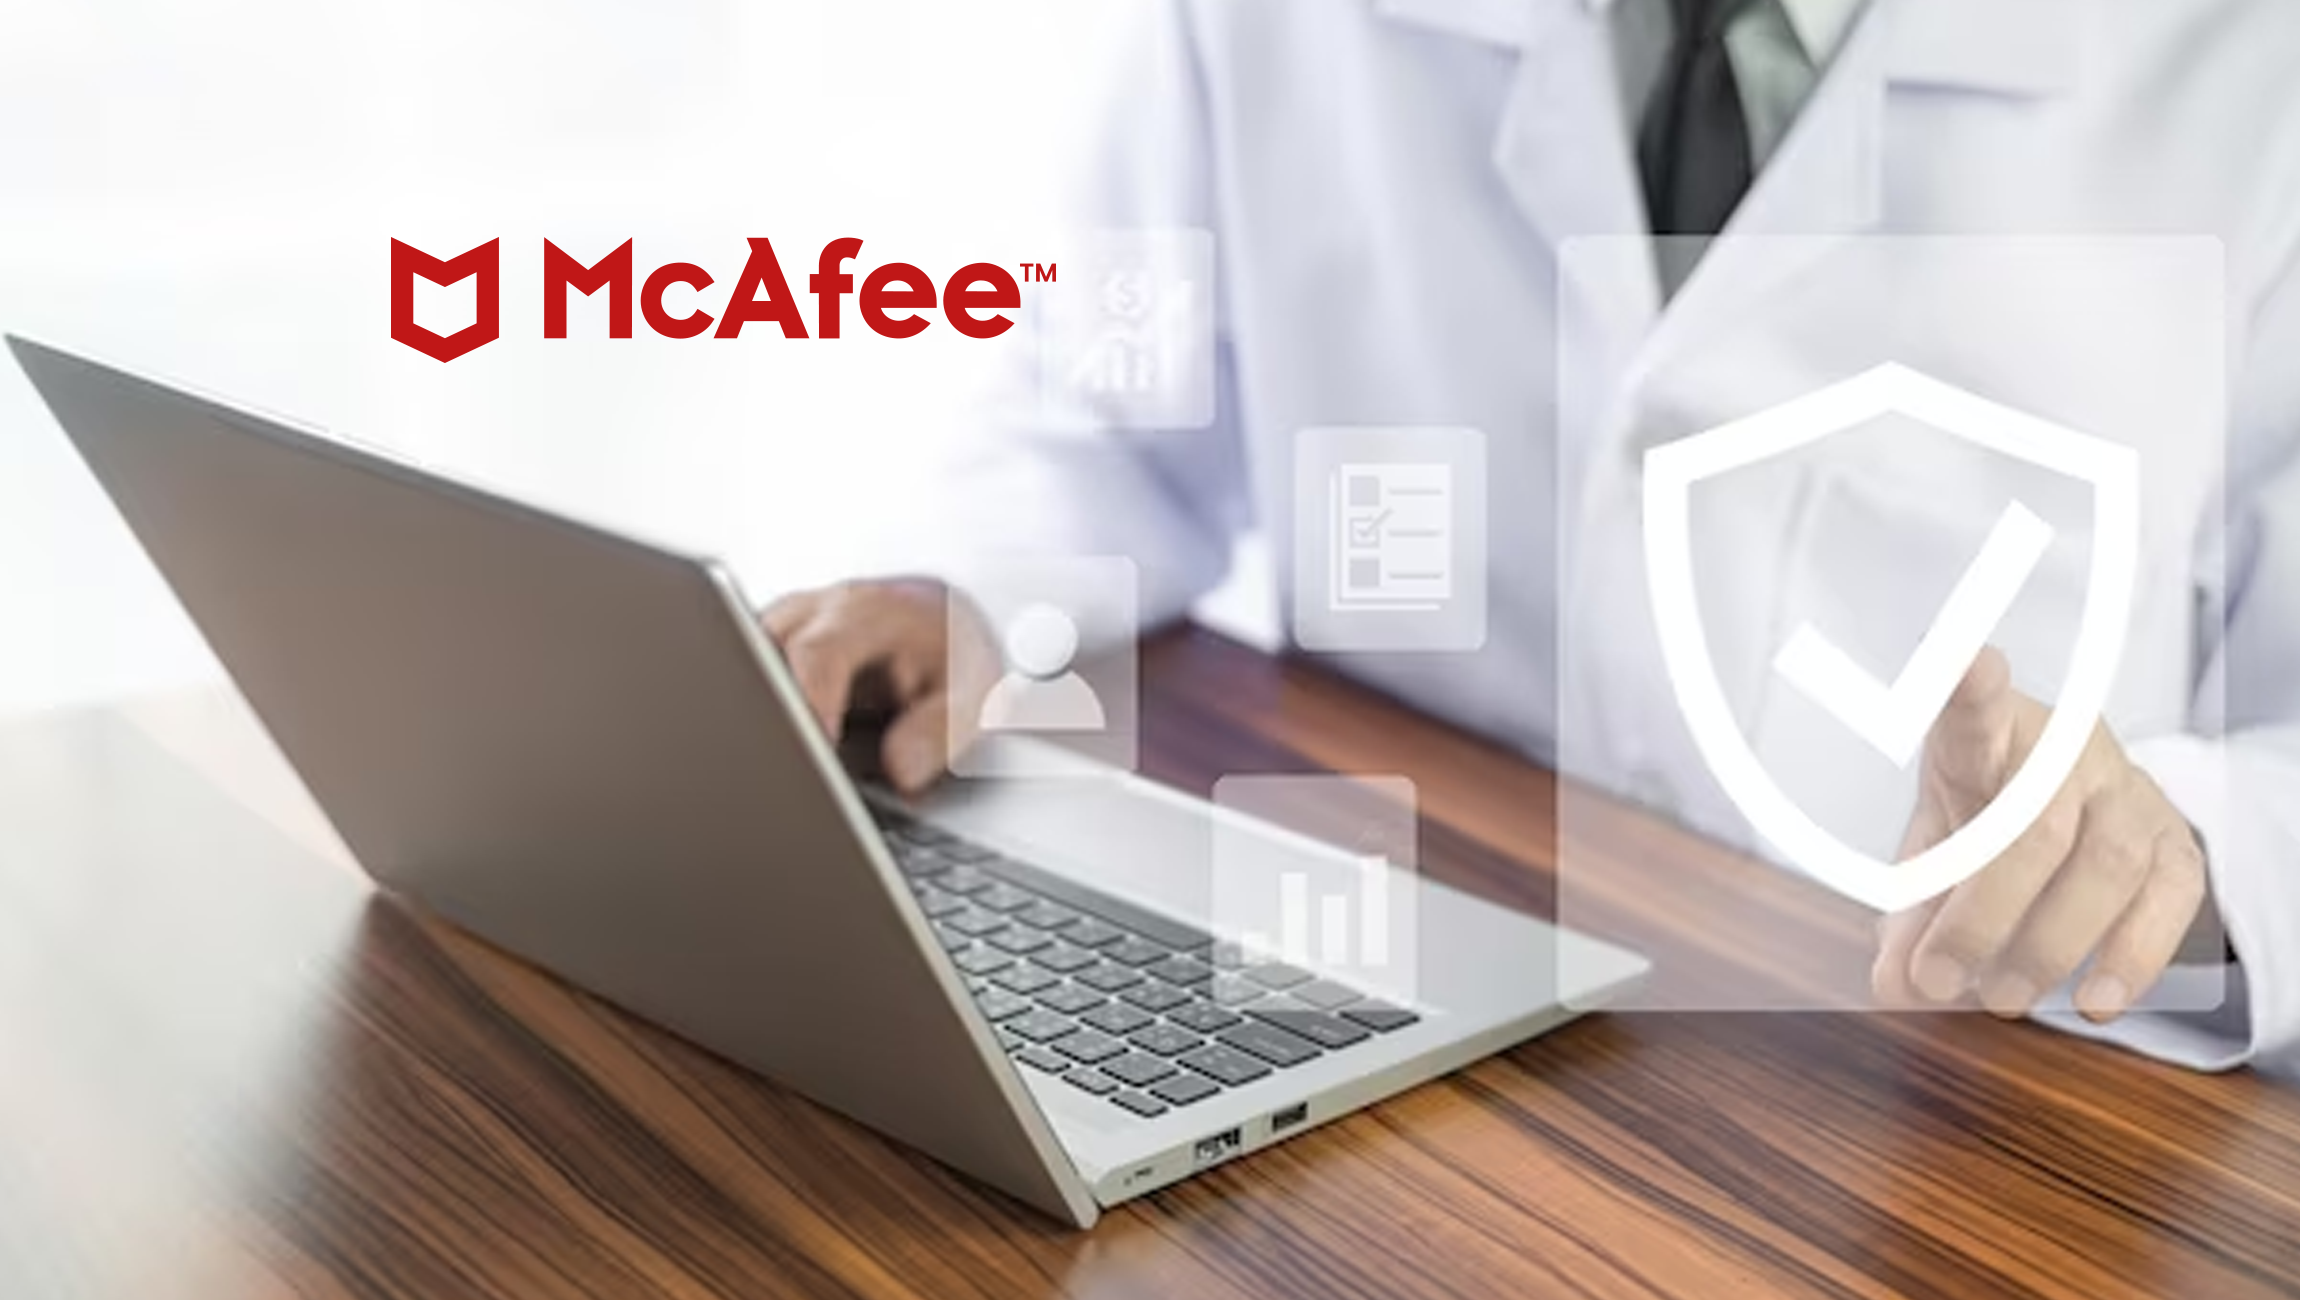 McAfee Study Unwraps Holiday Shopping Behavior and Shares Tips for a Safer Online Shopping Season